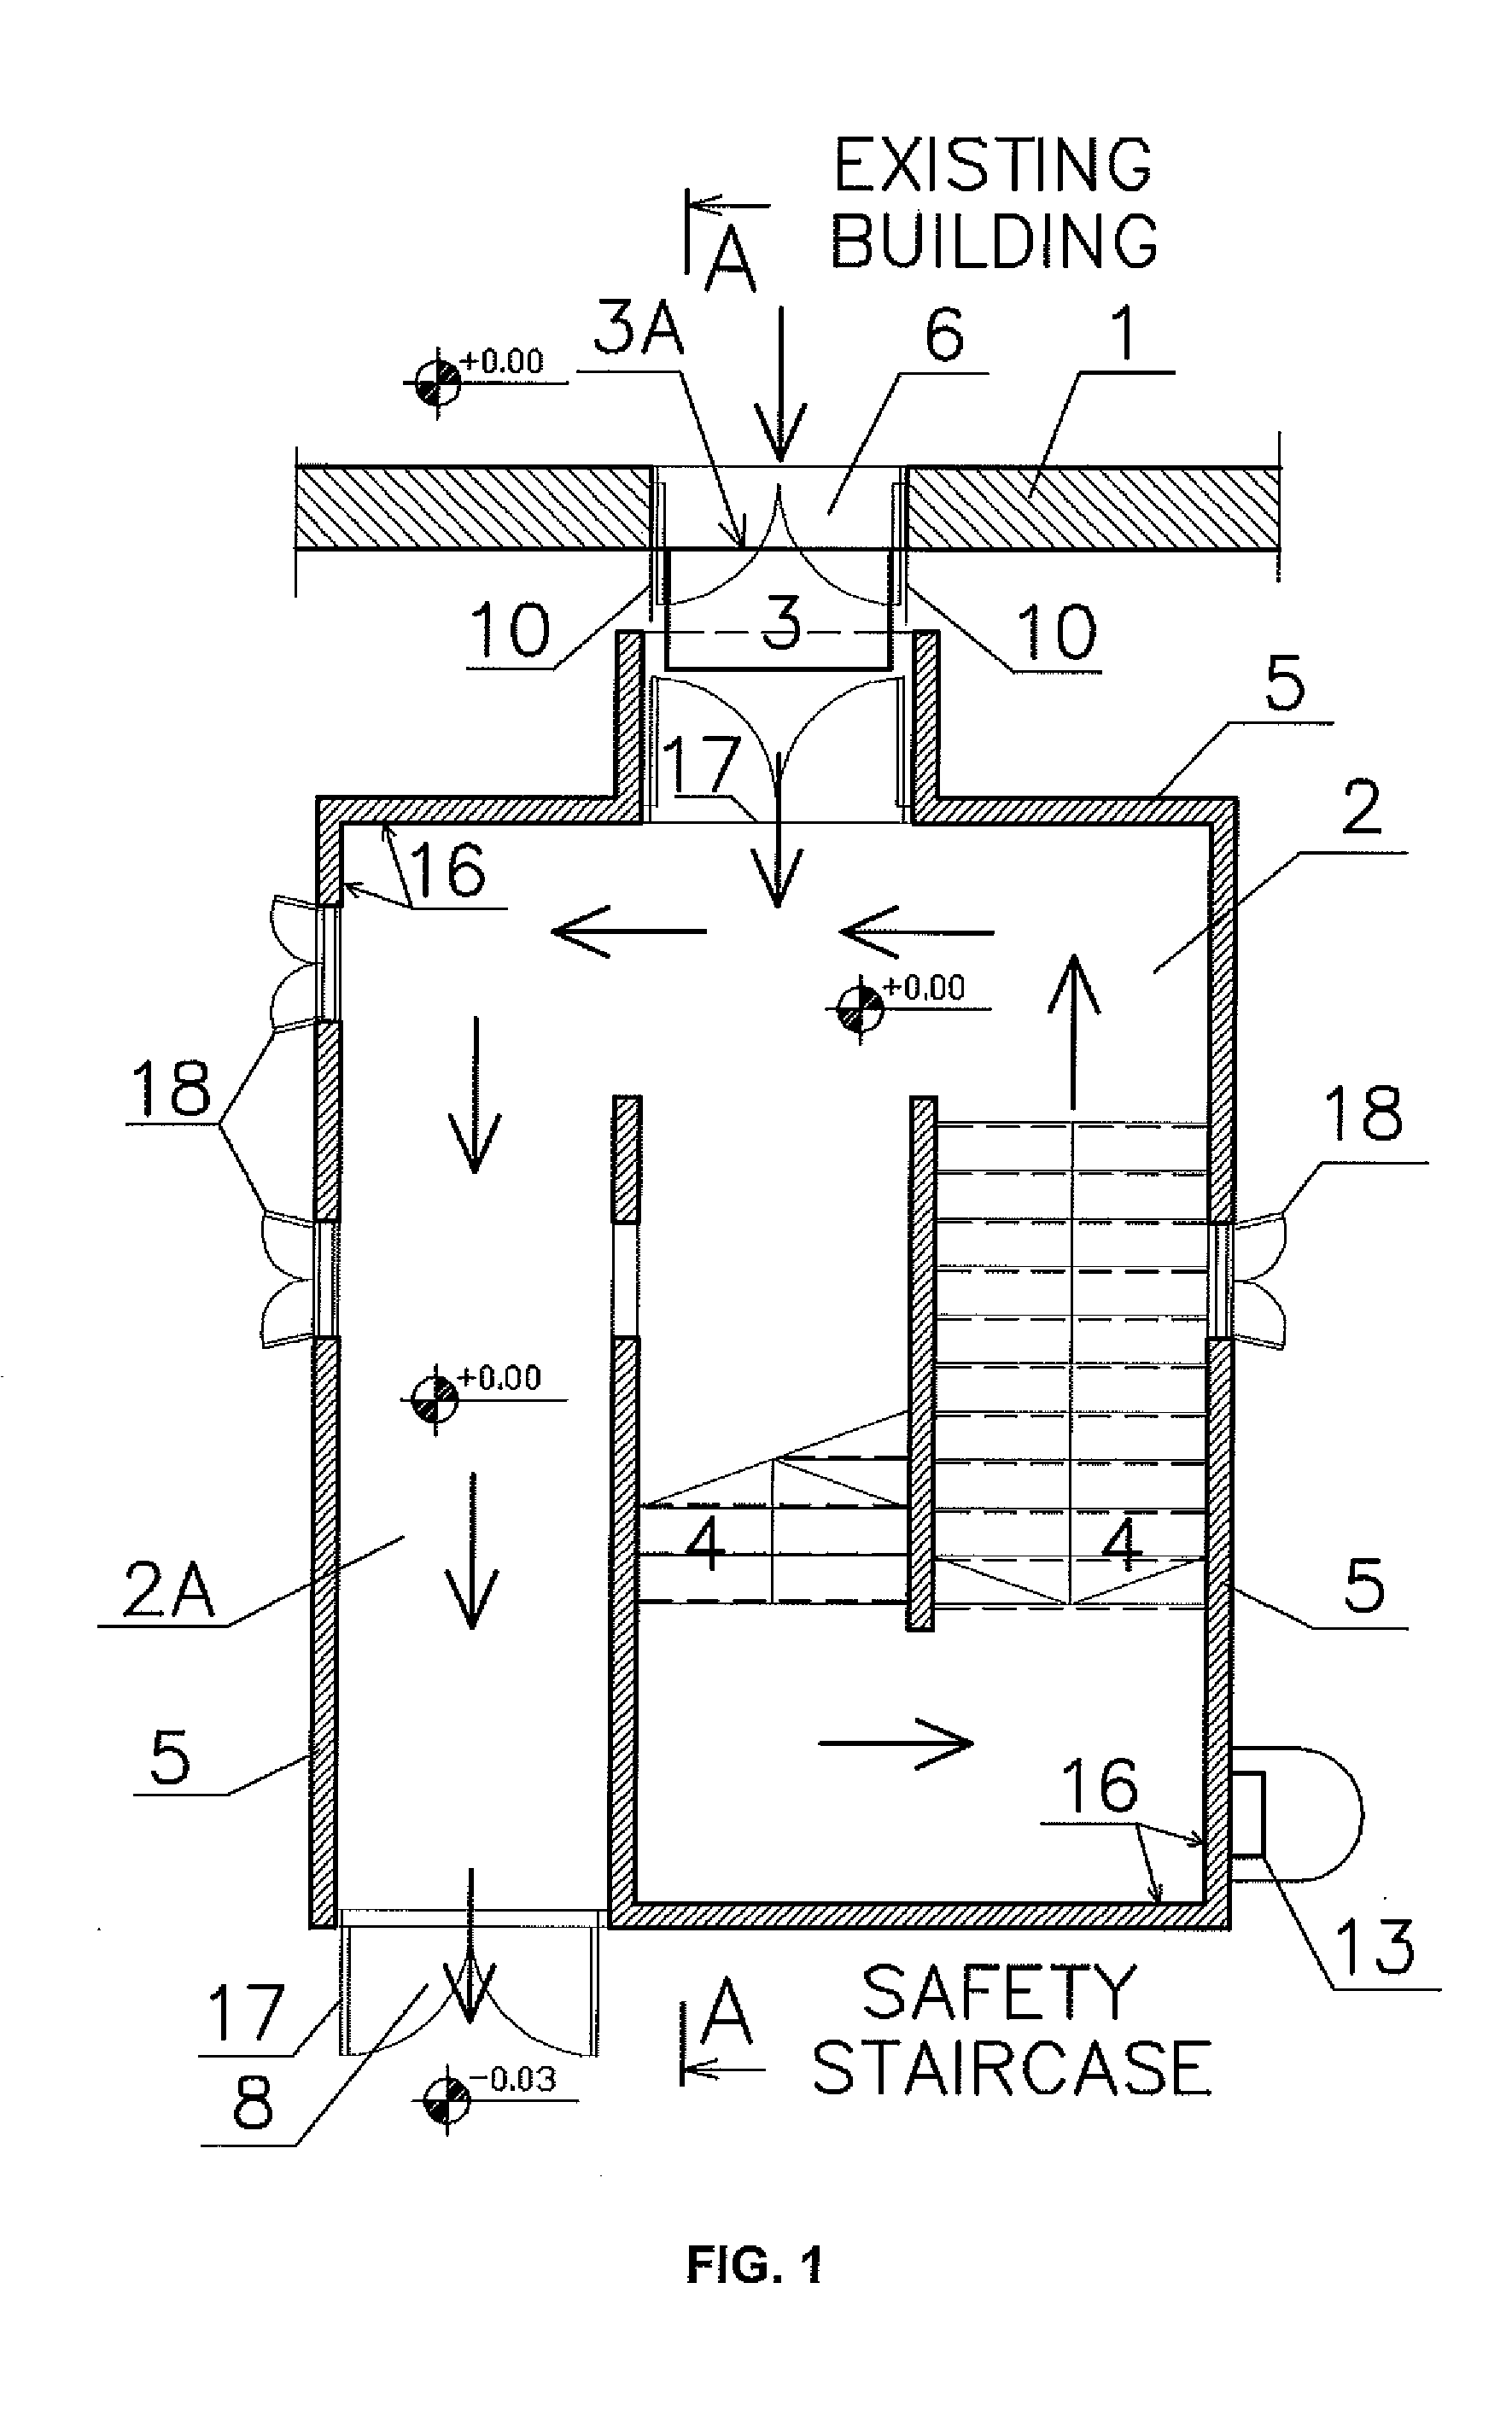 Escape staircase and method for allowing occupants of a building to escape safely during an emergency